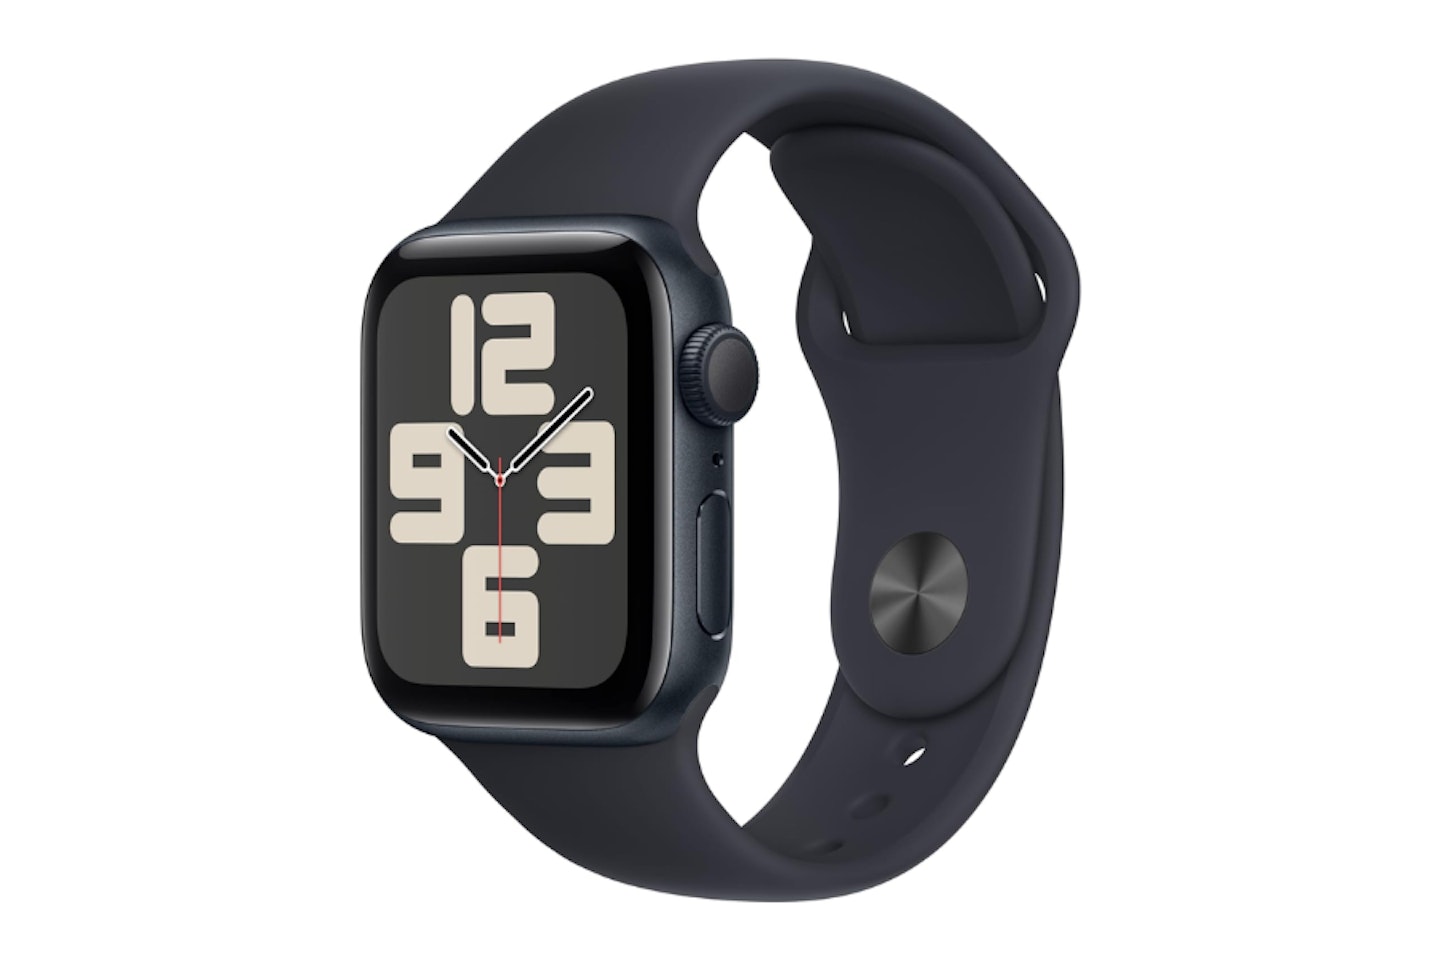 Apple Watch SE (2nd generation) - possibly the best fitness tracker for iPhone